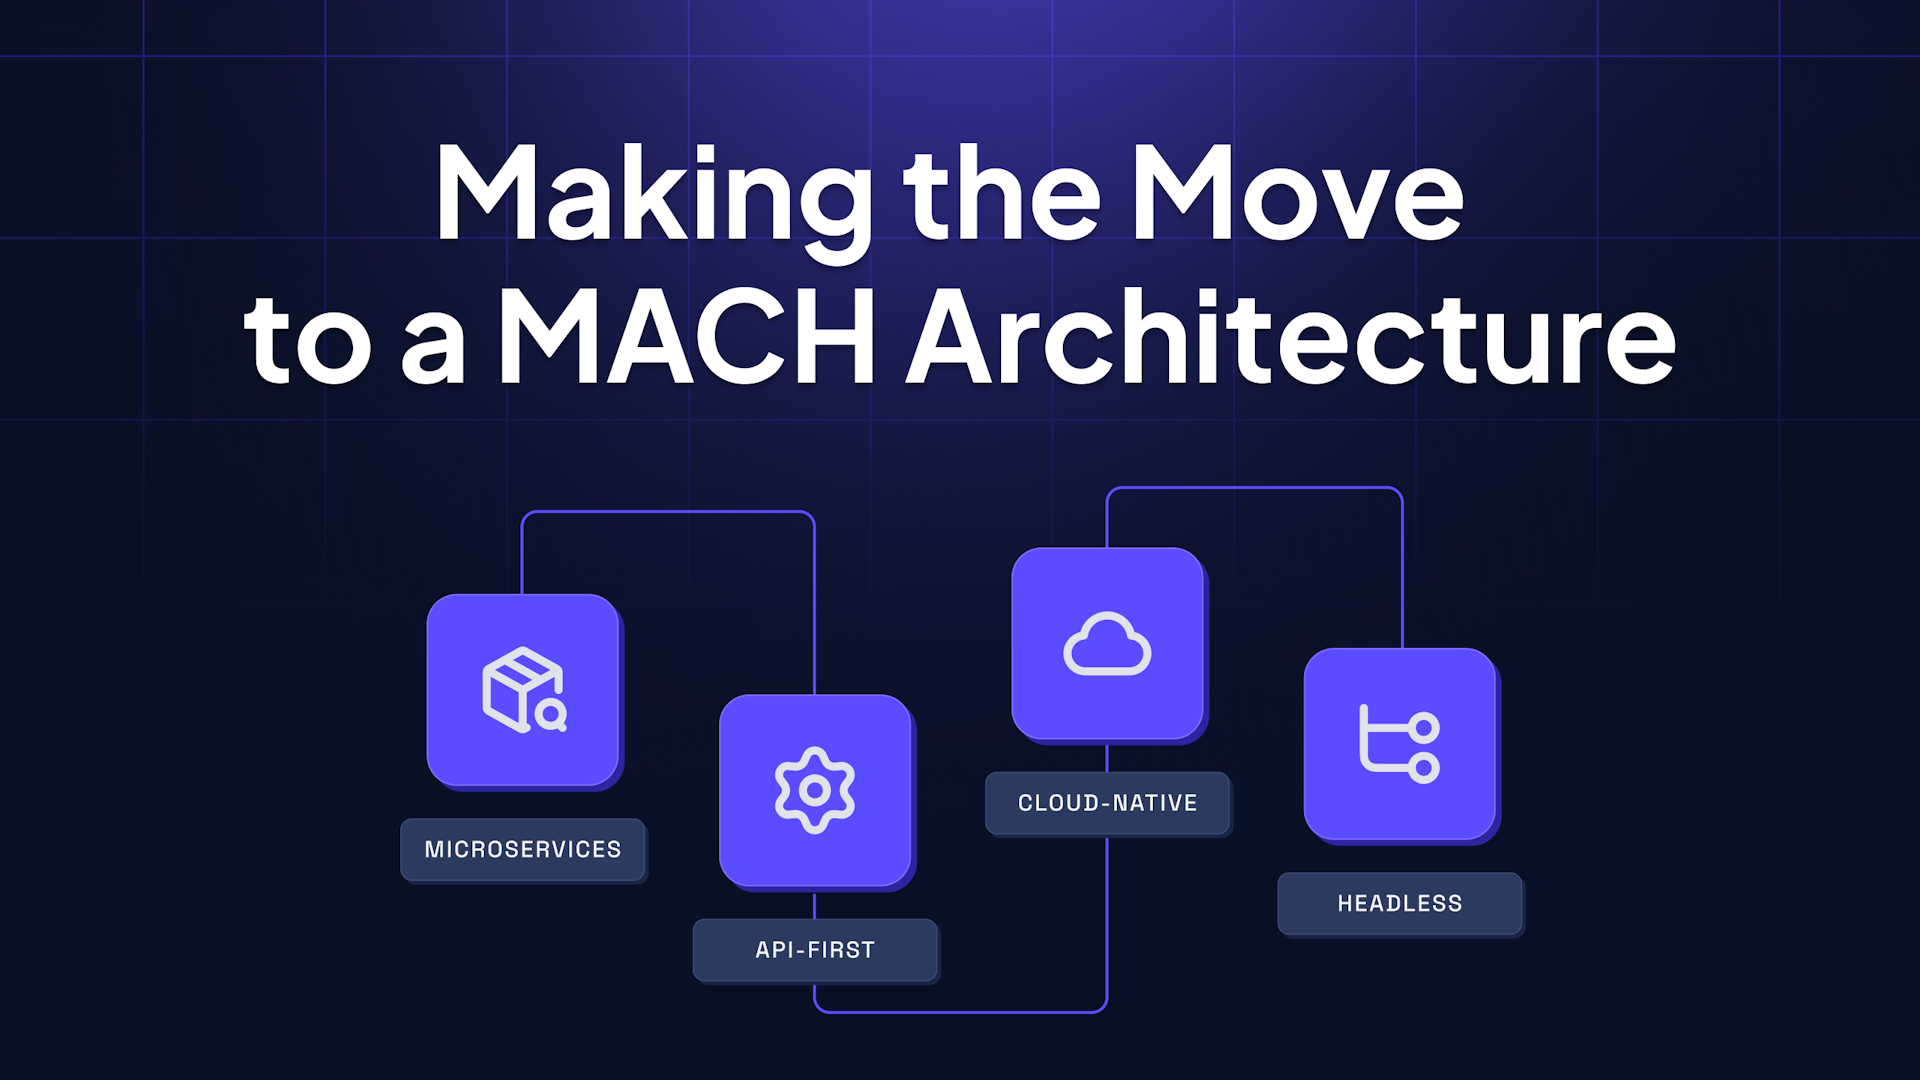 Making the move to a MACH Architecture